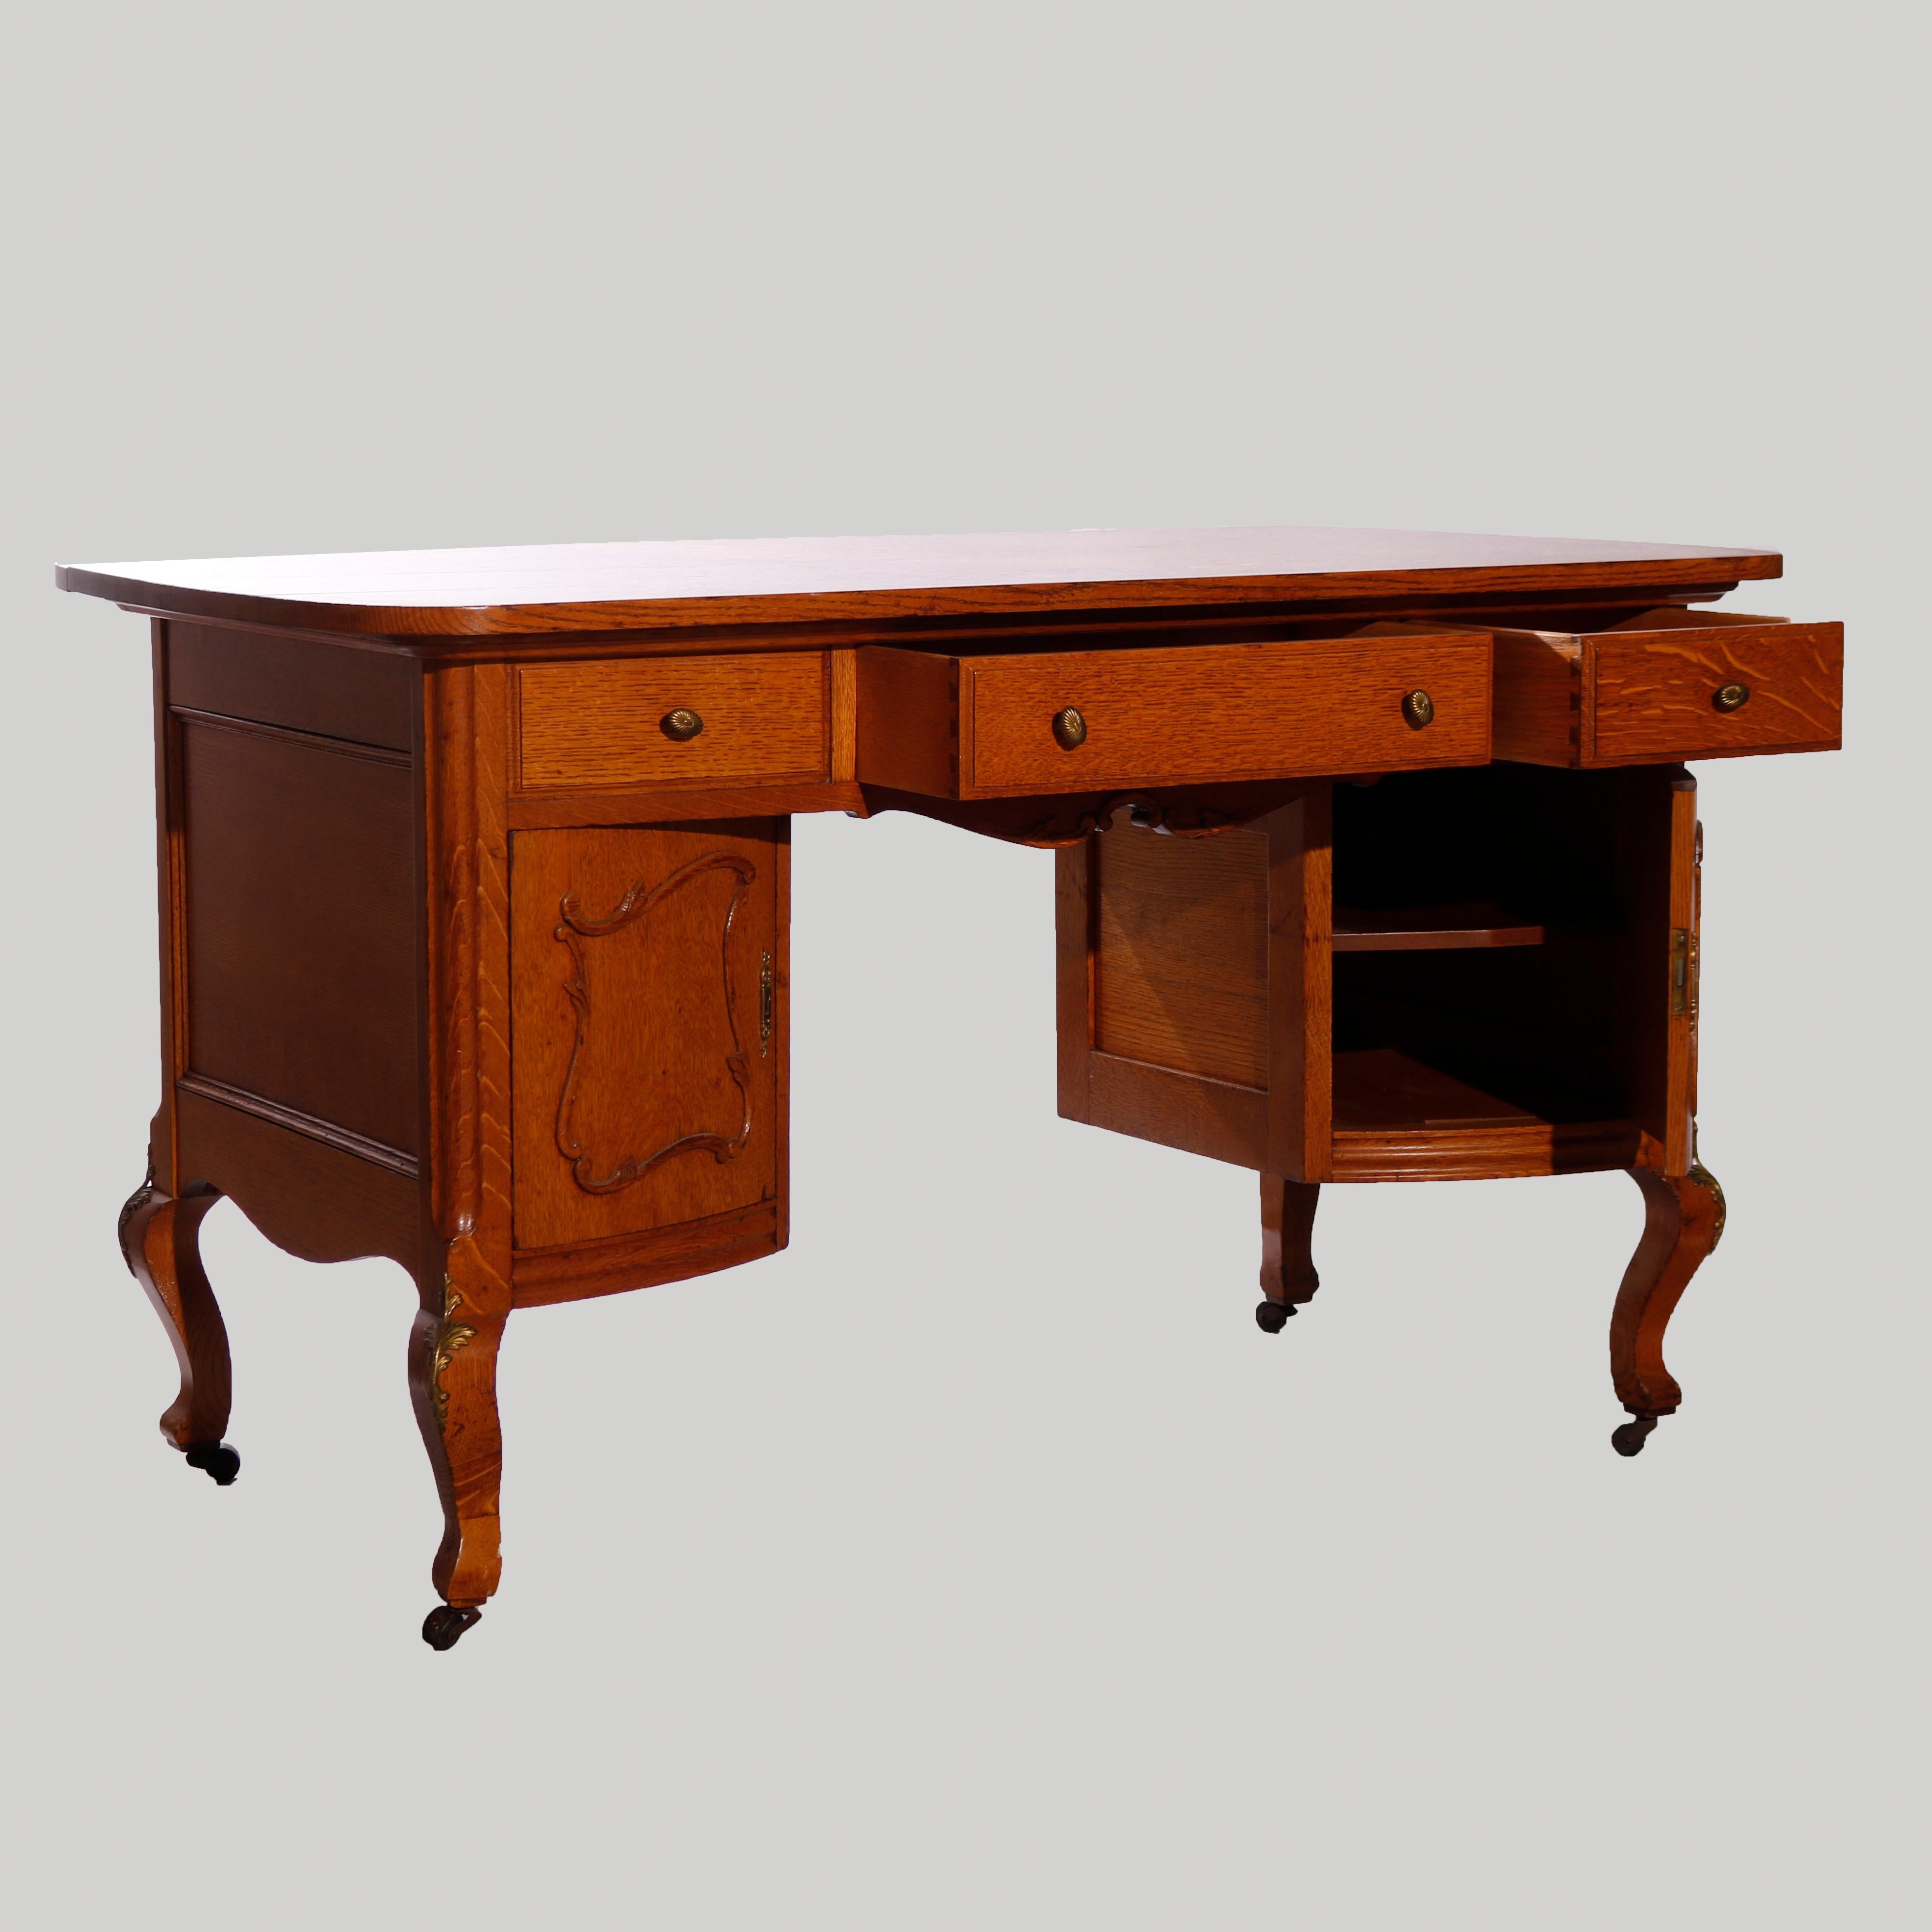 An antique RJ Horner partners desk (double sided allowing two people to work at the desk simultaneously) offers quarter sawn oak construction with upper drawers over flanking curved side cabinets having foliate carved elements and opening to shelved